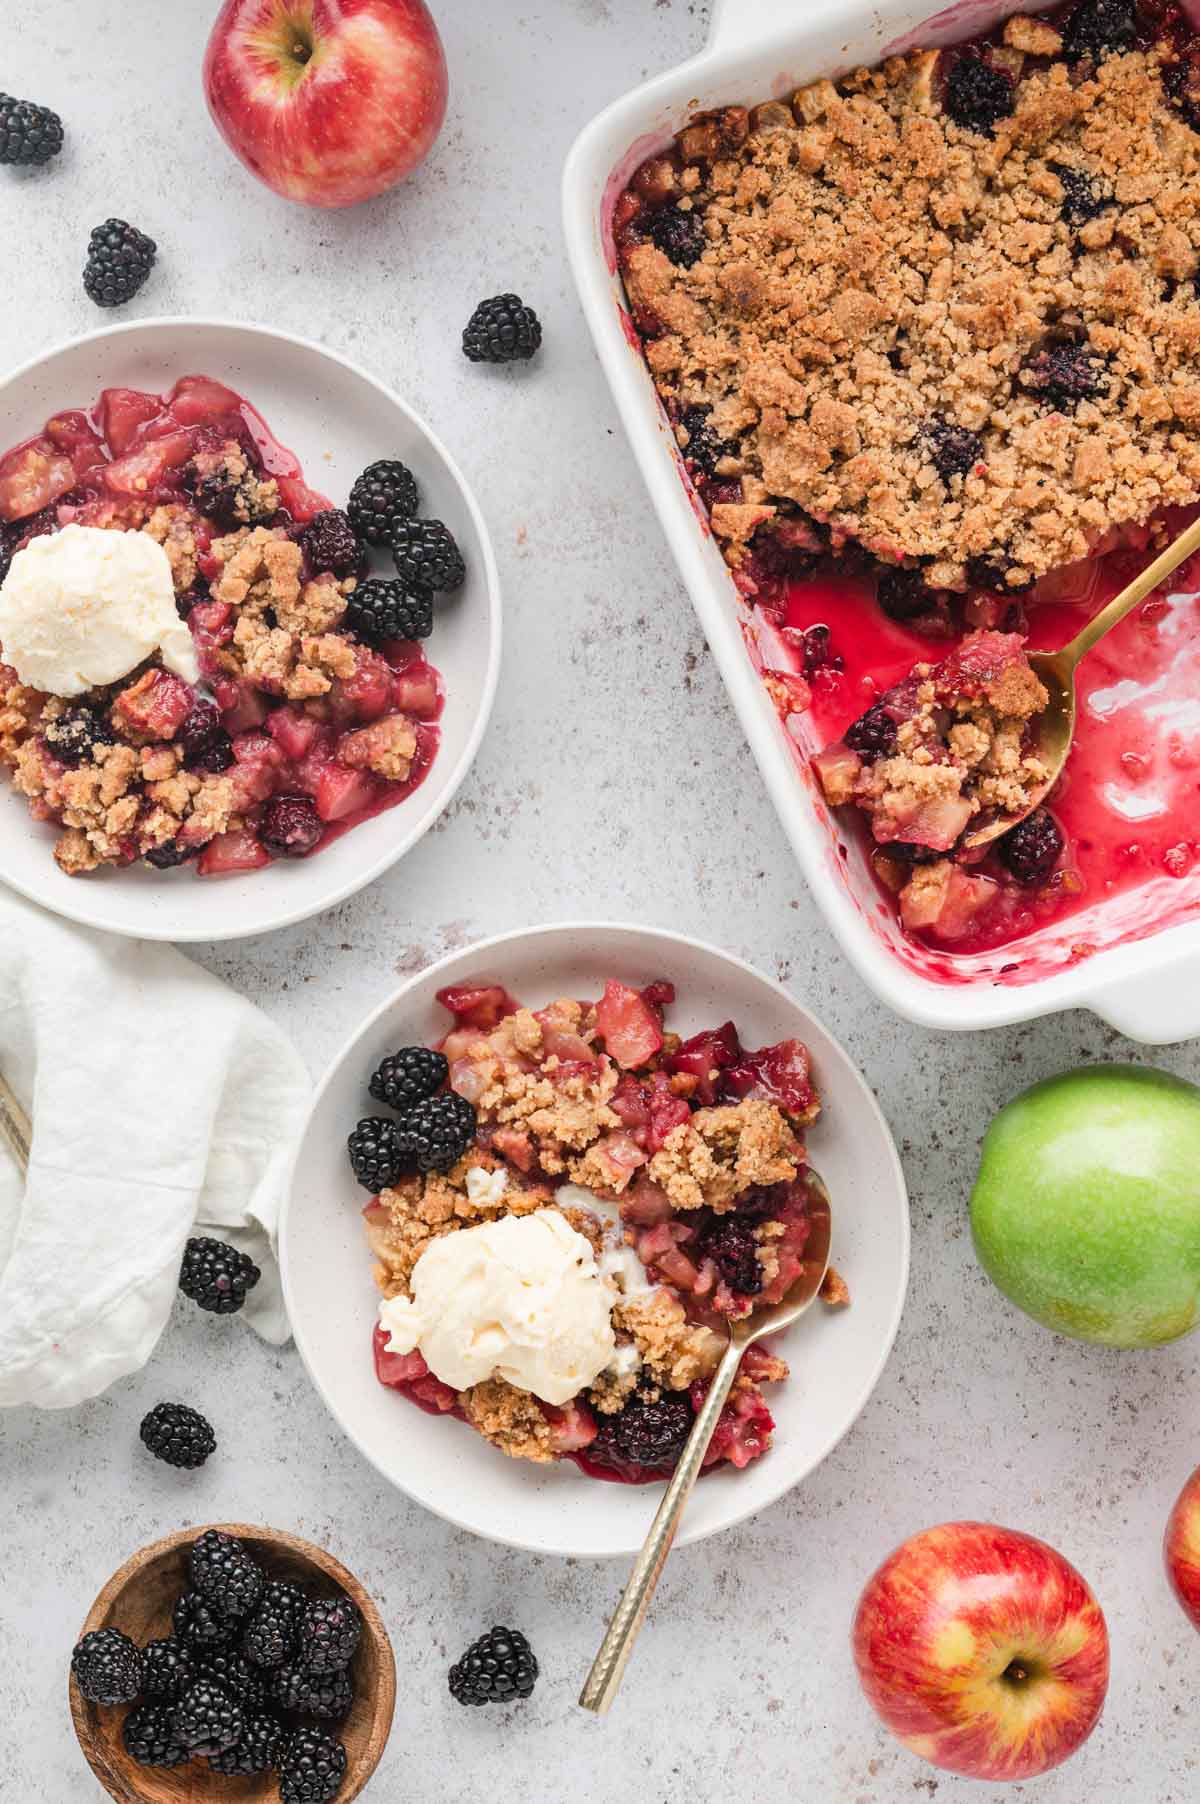 Apple and blackberry crumble with vanilla ice cream in white bowls with spoons.